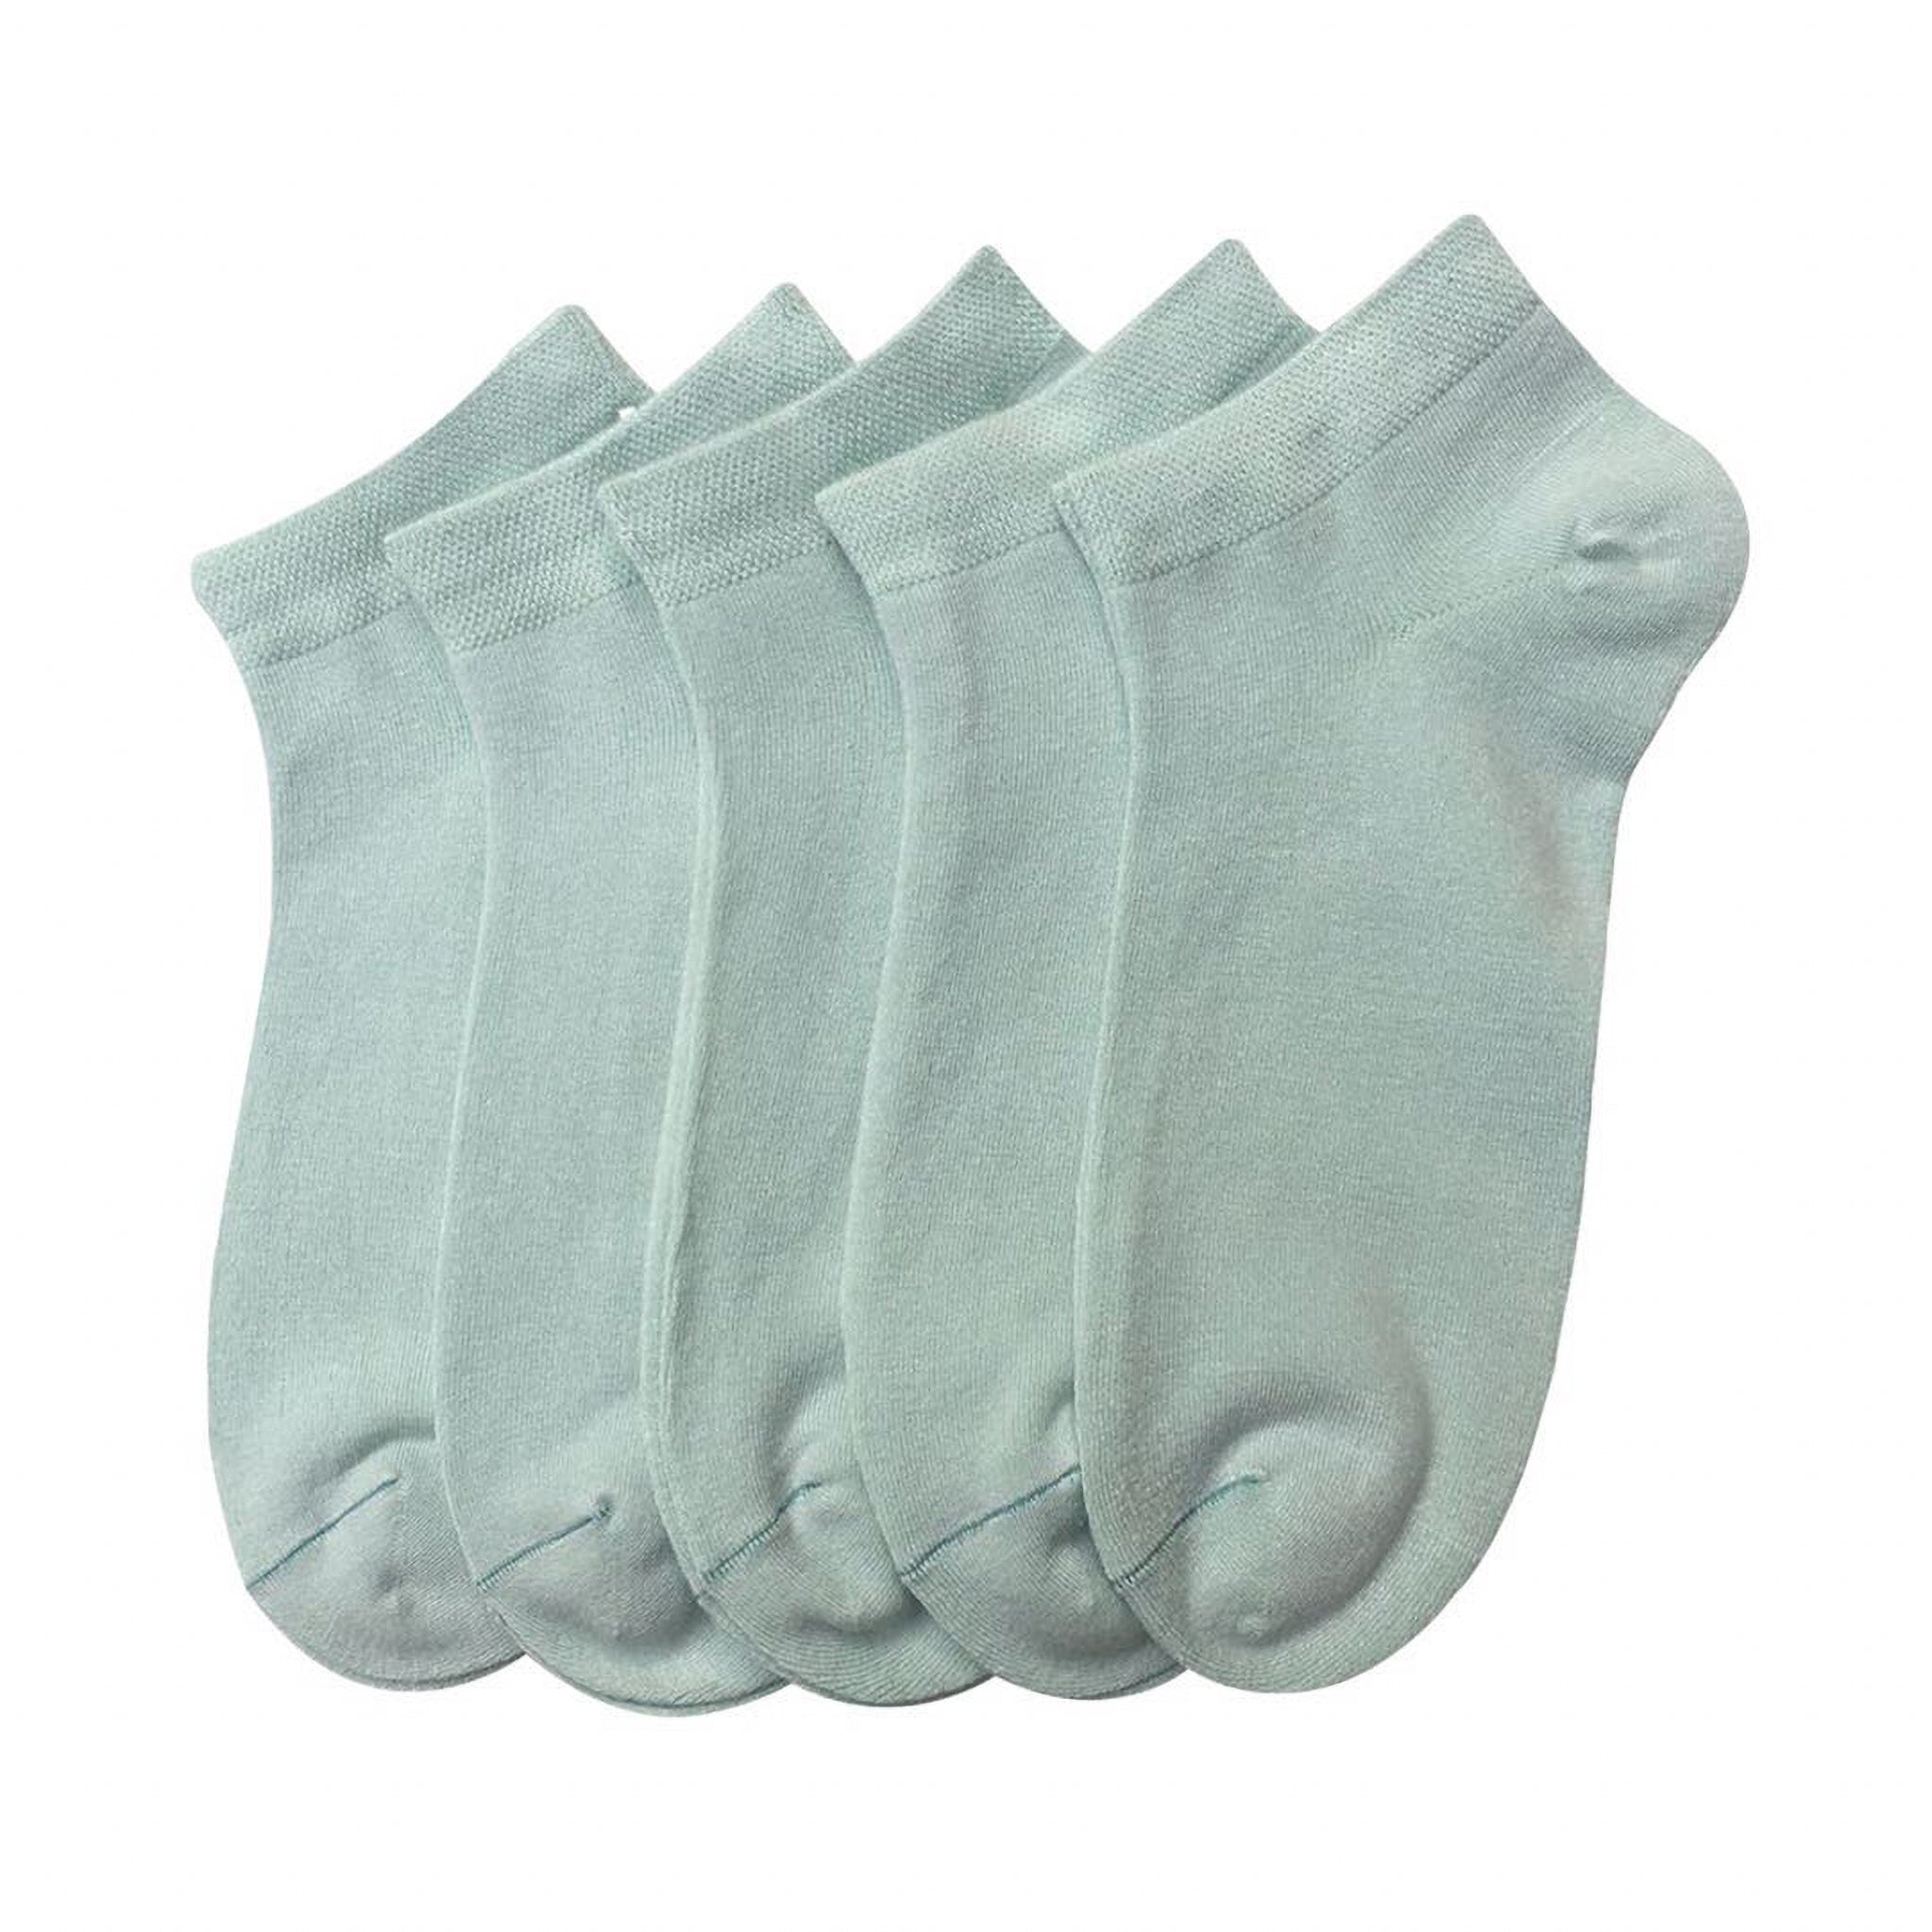 Bamboo Ankle Socks Athletic Thin Soft Sock Odor Resistant 5 Pairs - Serisimple